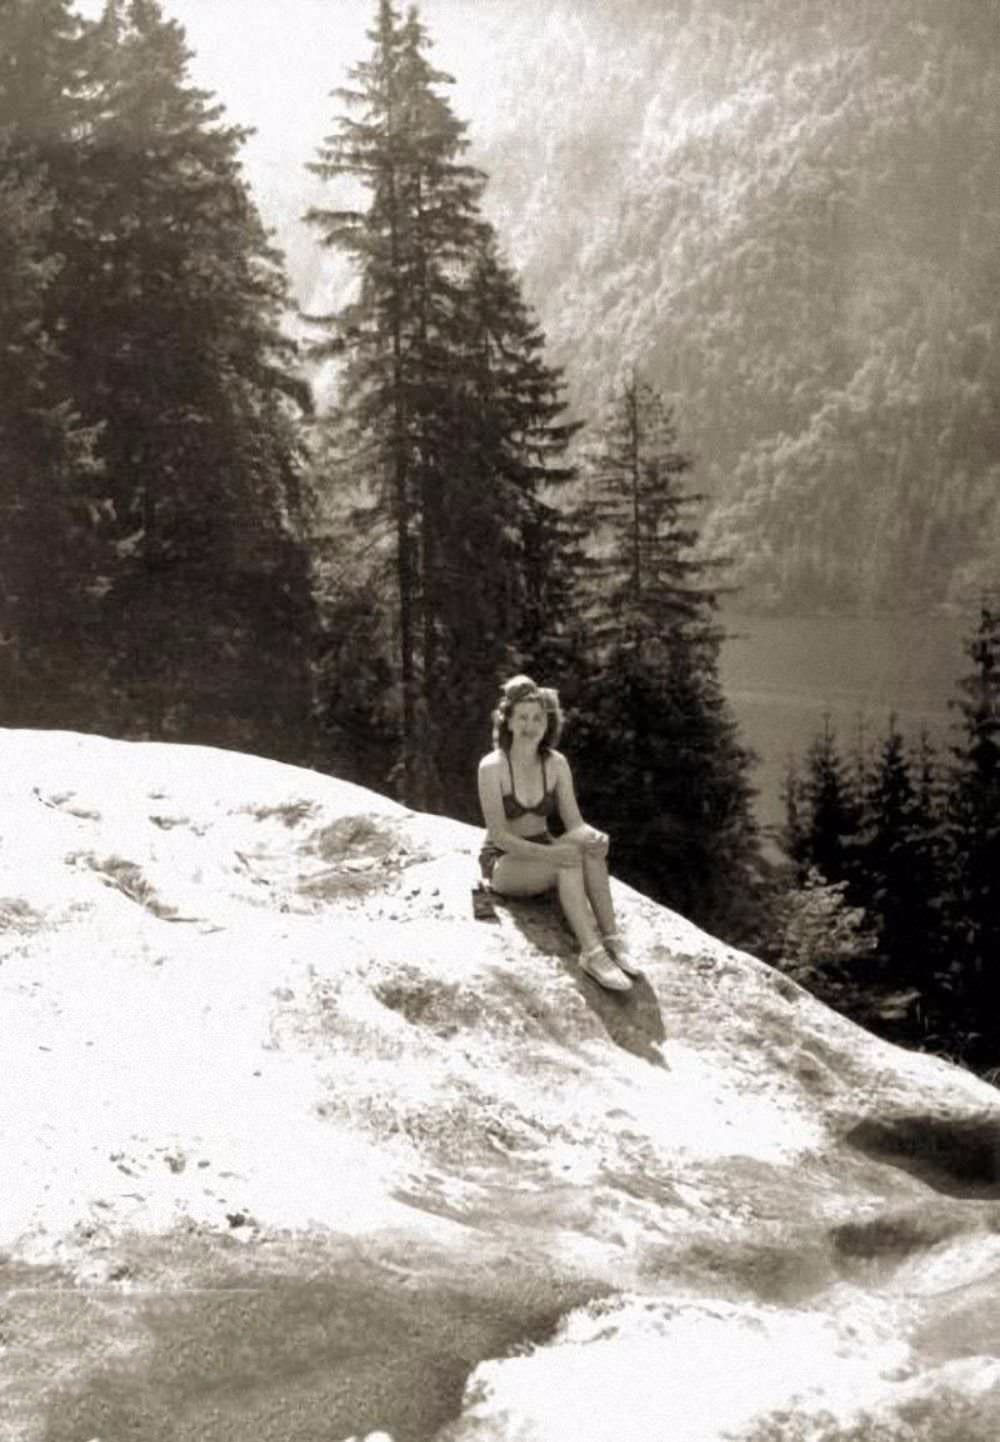 Hitler disapproved of some of Braun's habits such as smoking, wearing makeup, skinny dipping, and nude sunbathing. Here, Braun, in a bathing suit, relaxes by Konigssee lake in 1940.